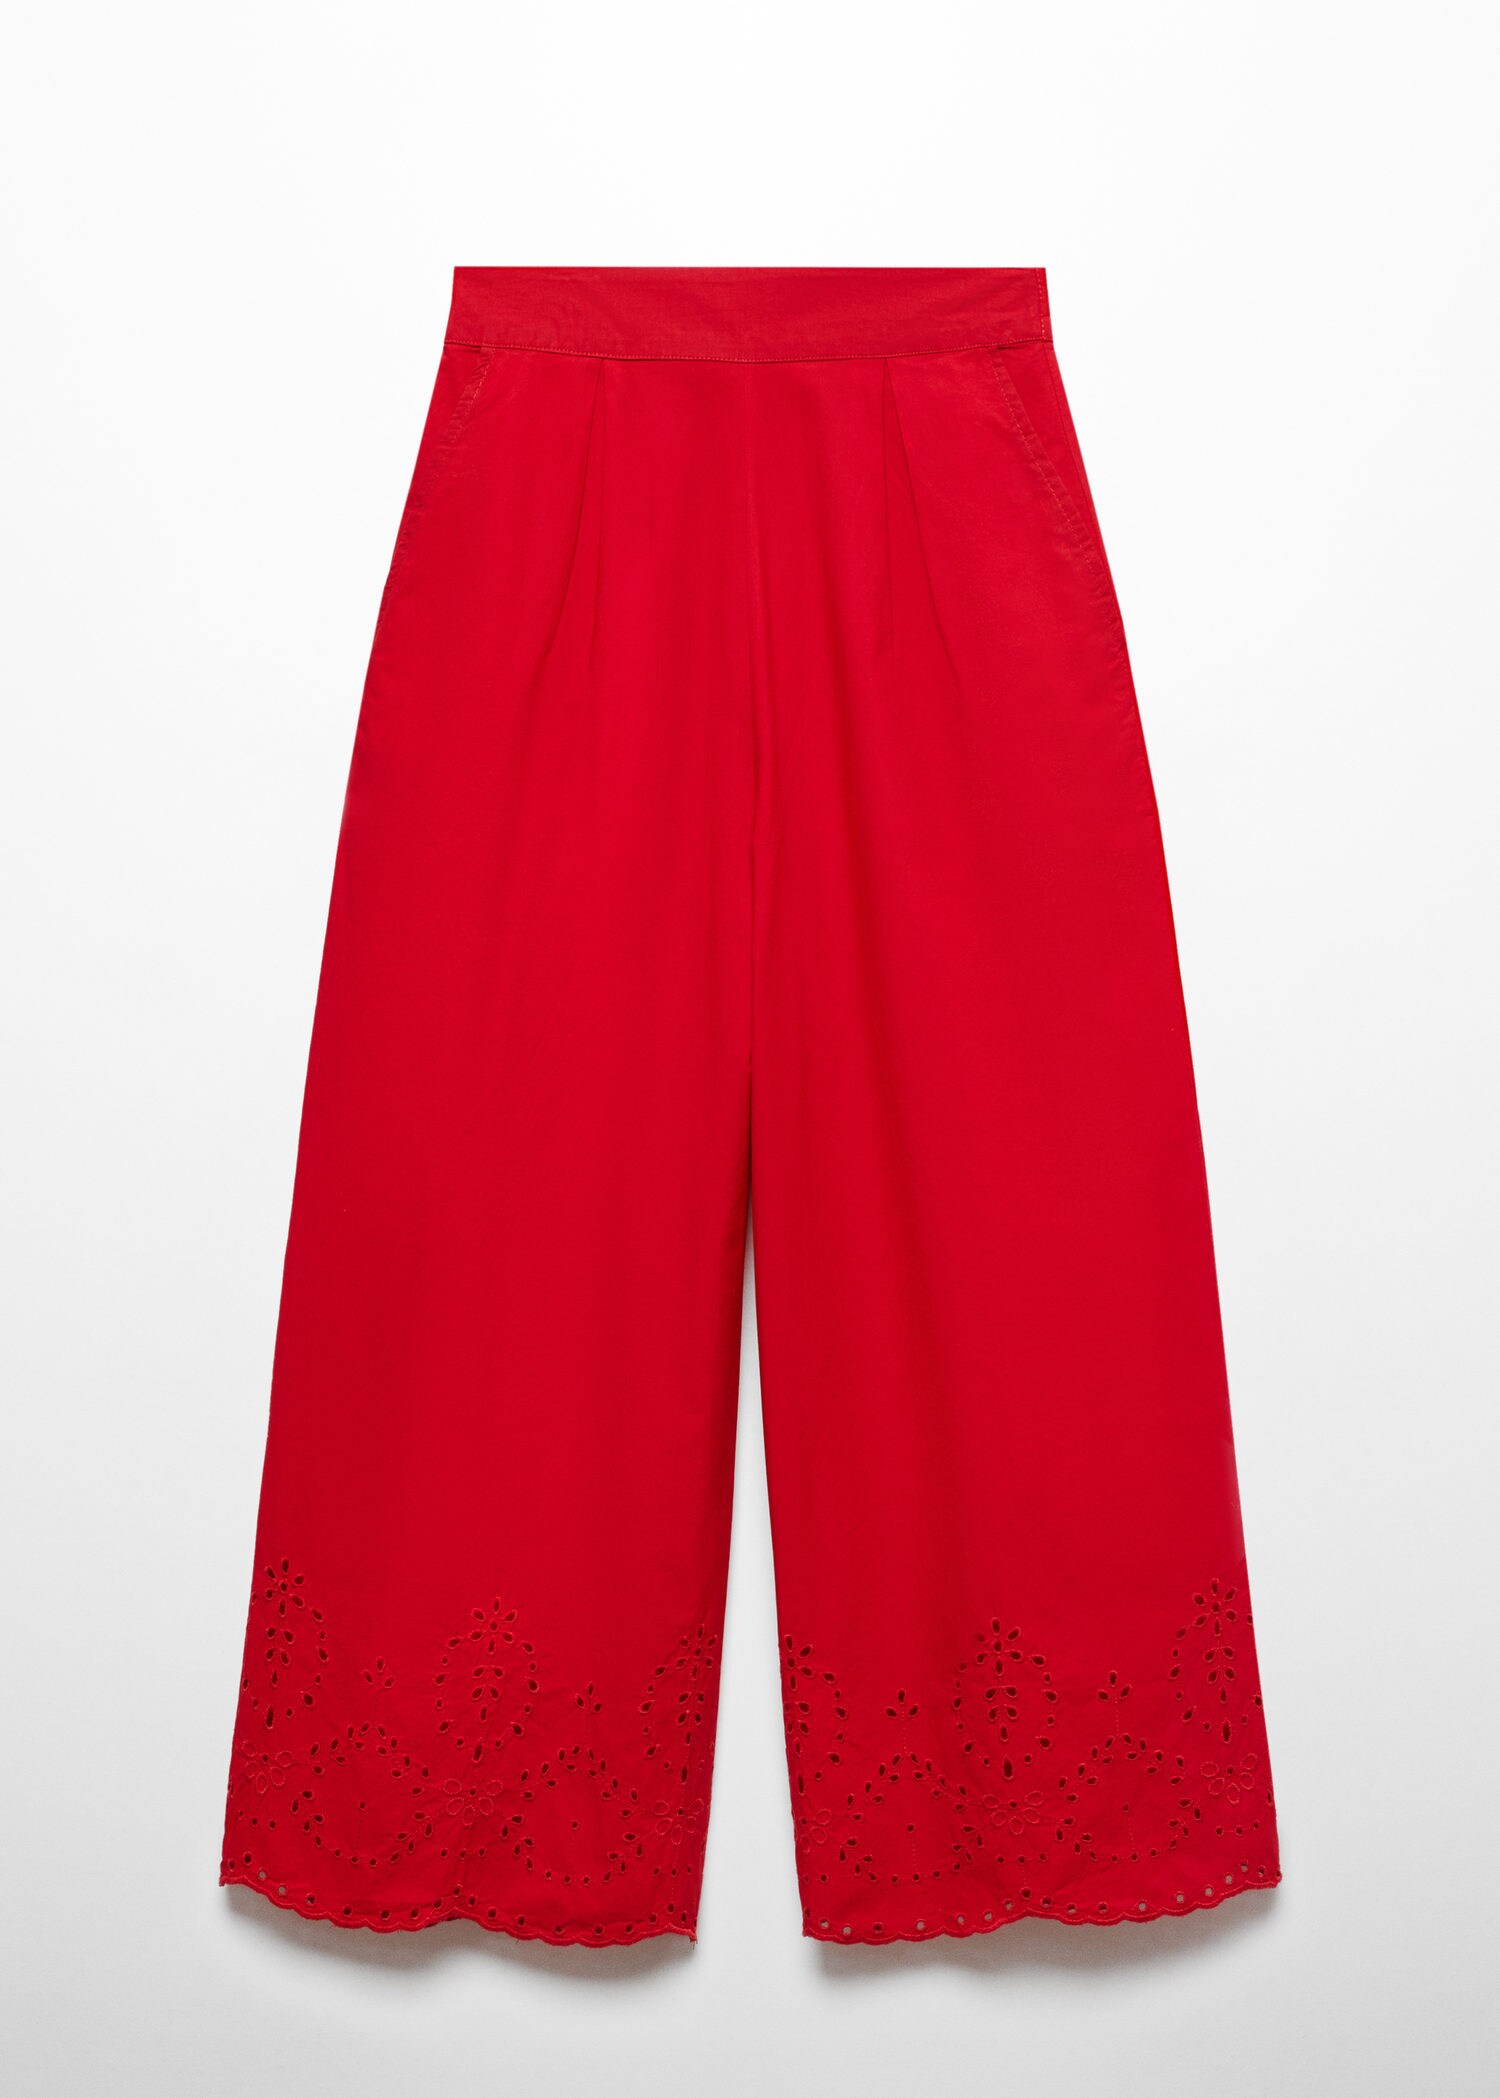 Embroidered culotte pants